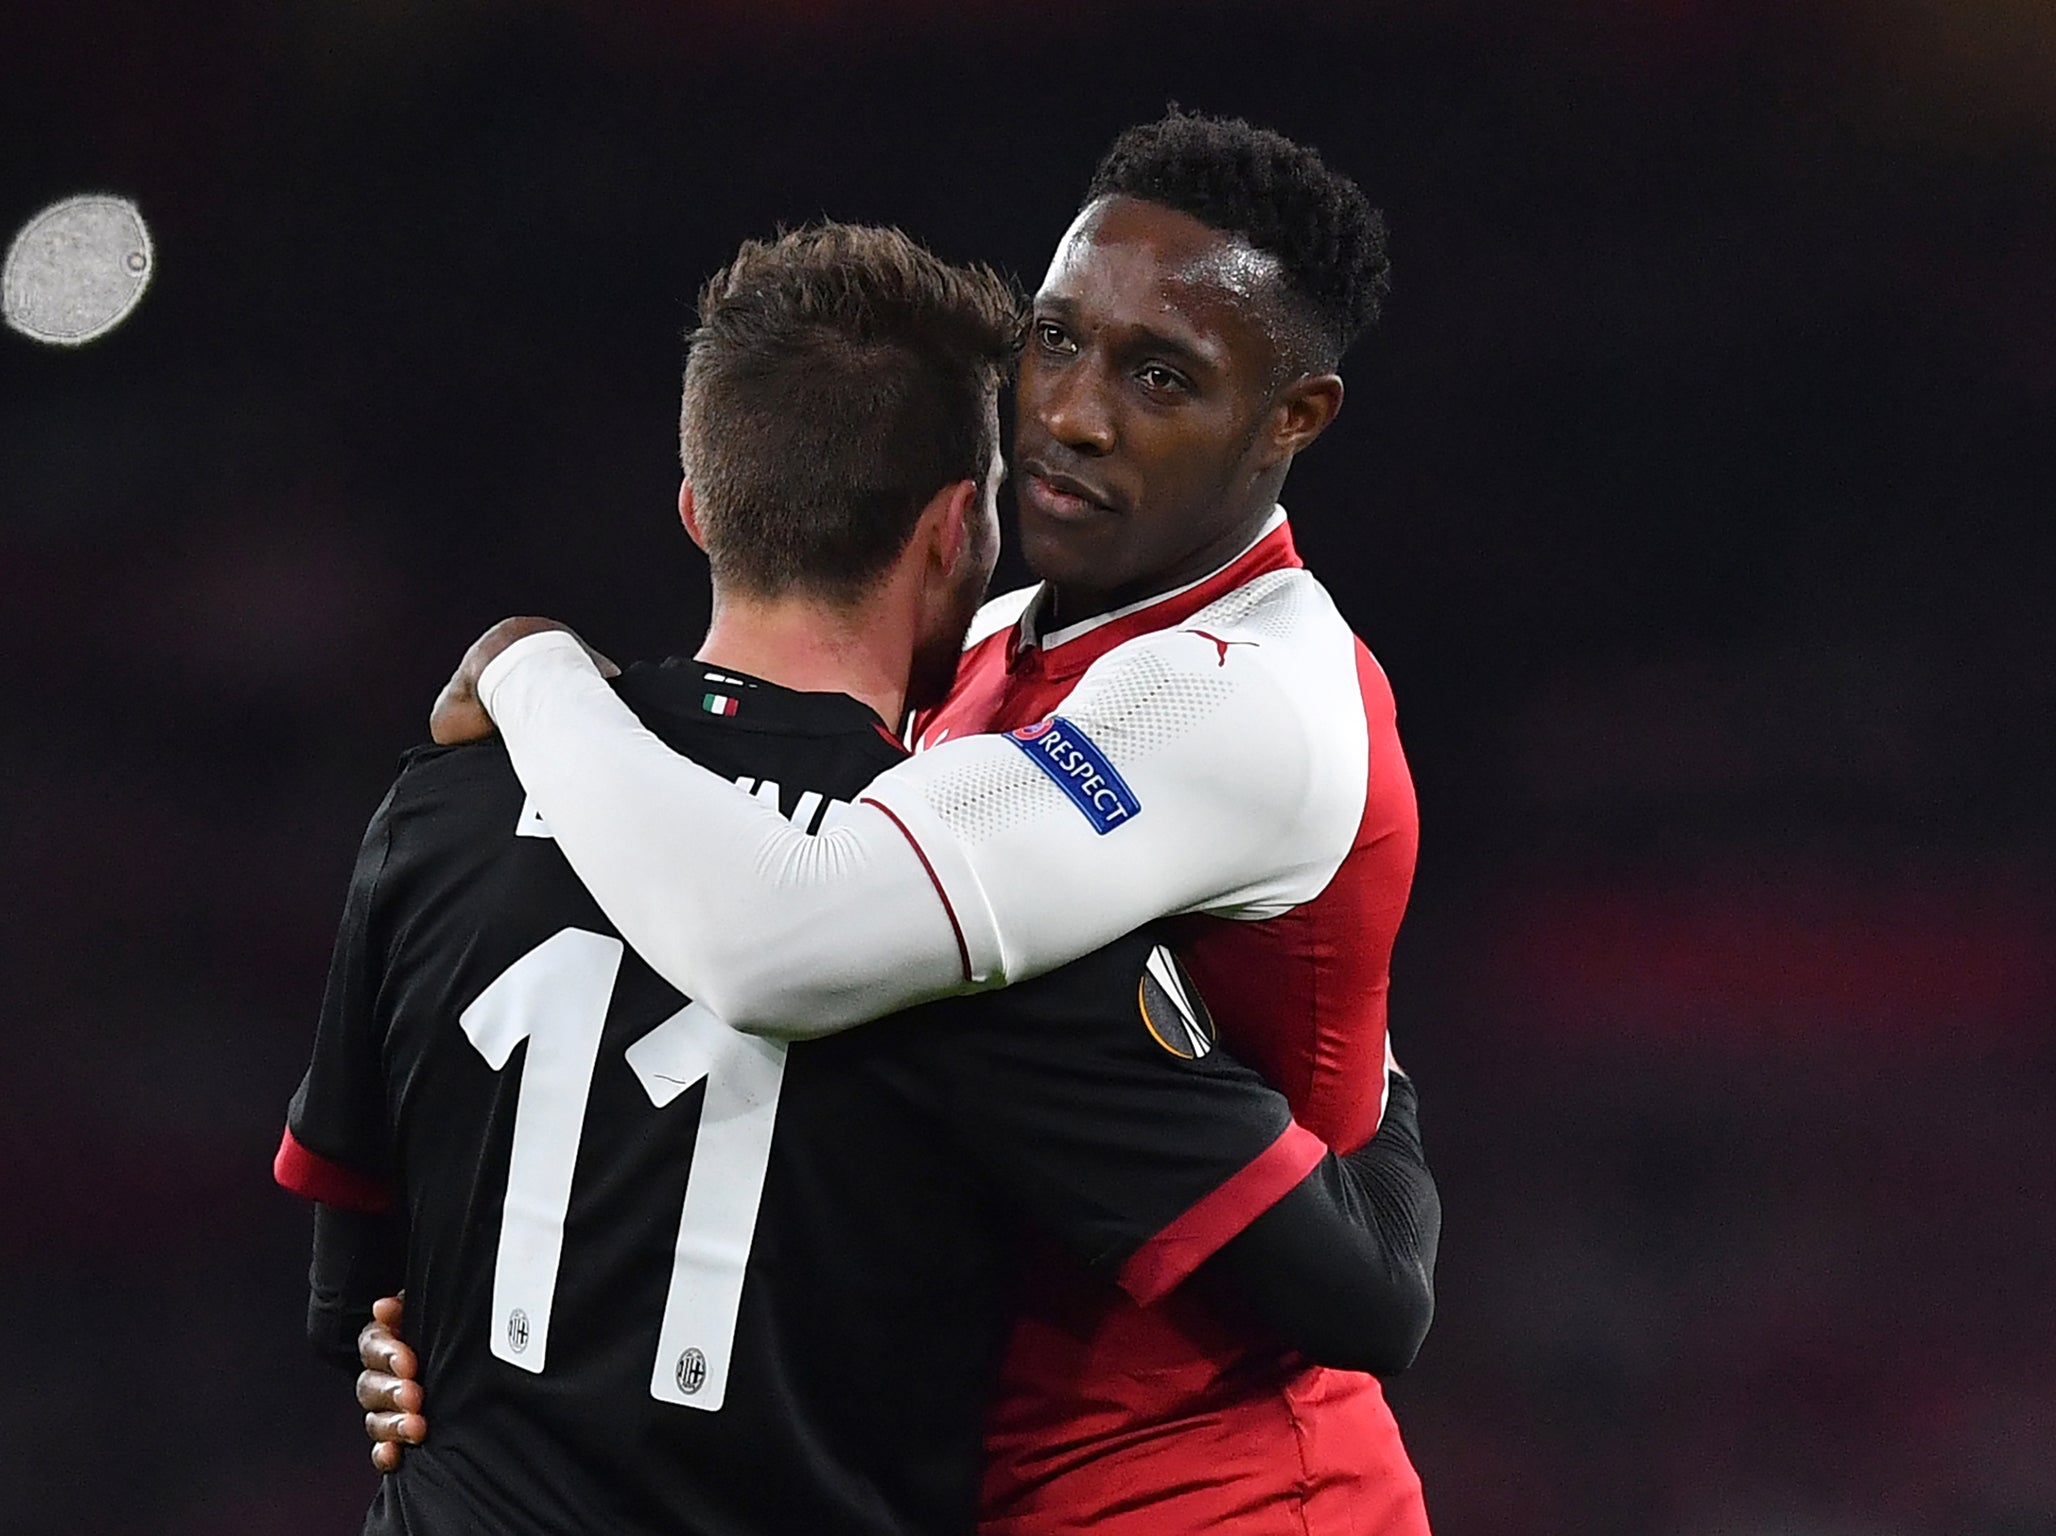 Danny Welbeck was Arsenal's standout performance